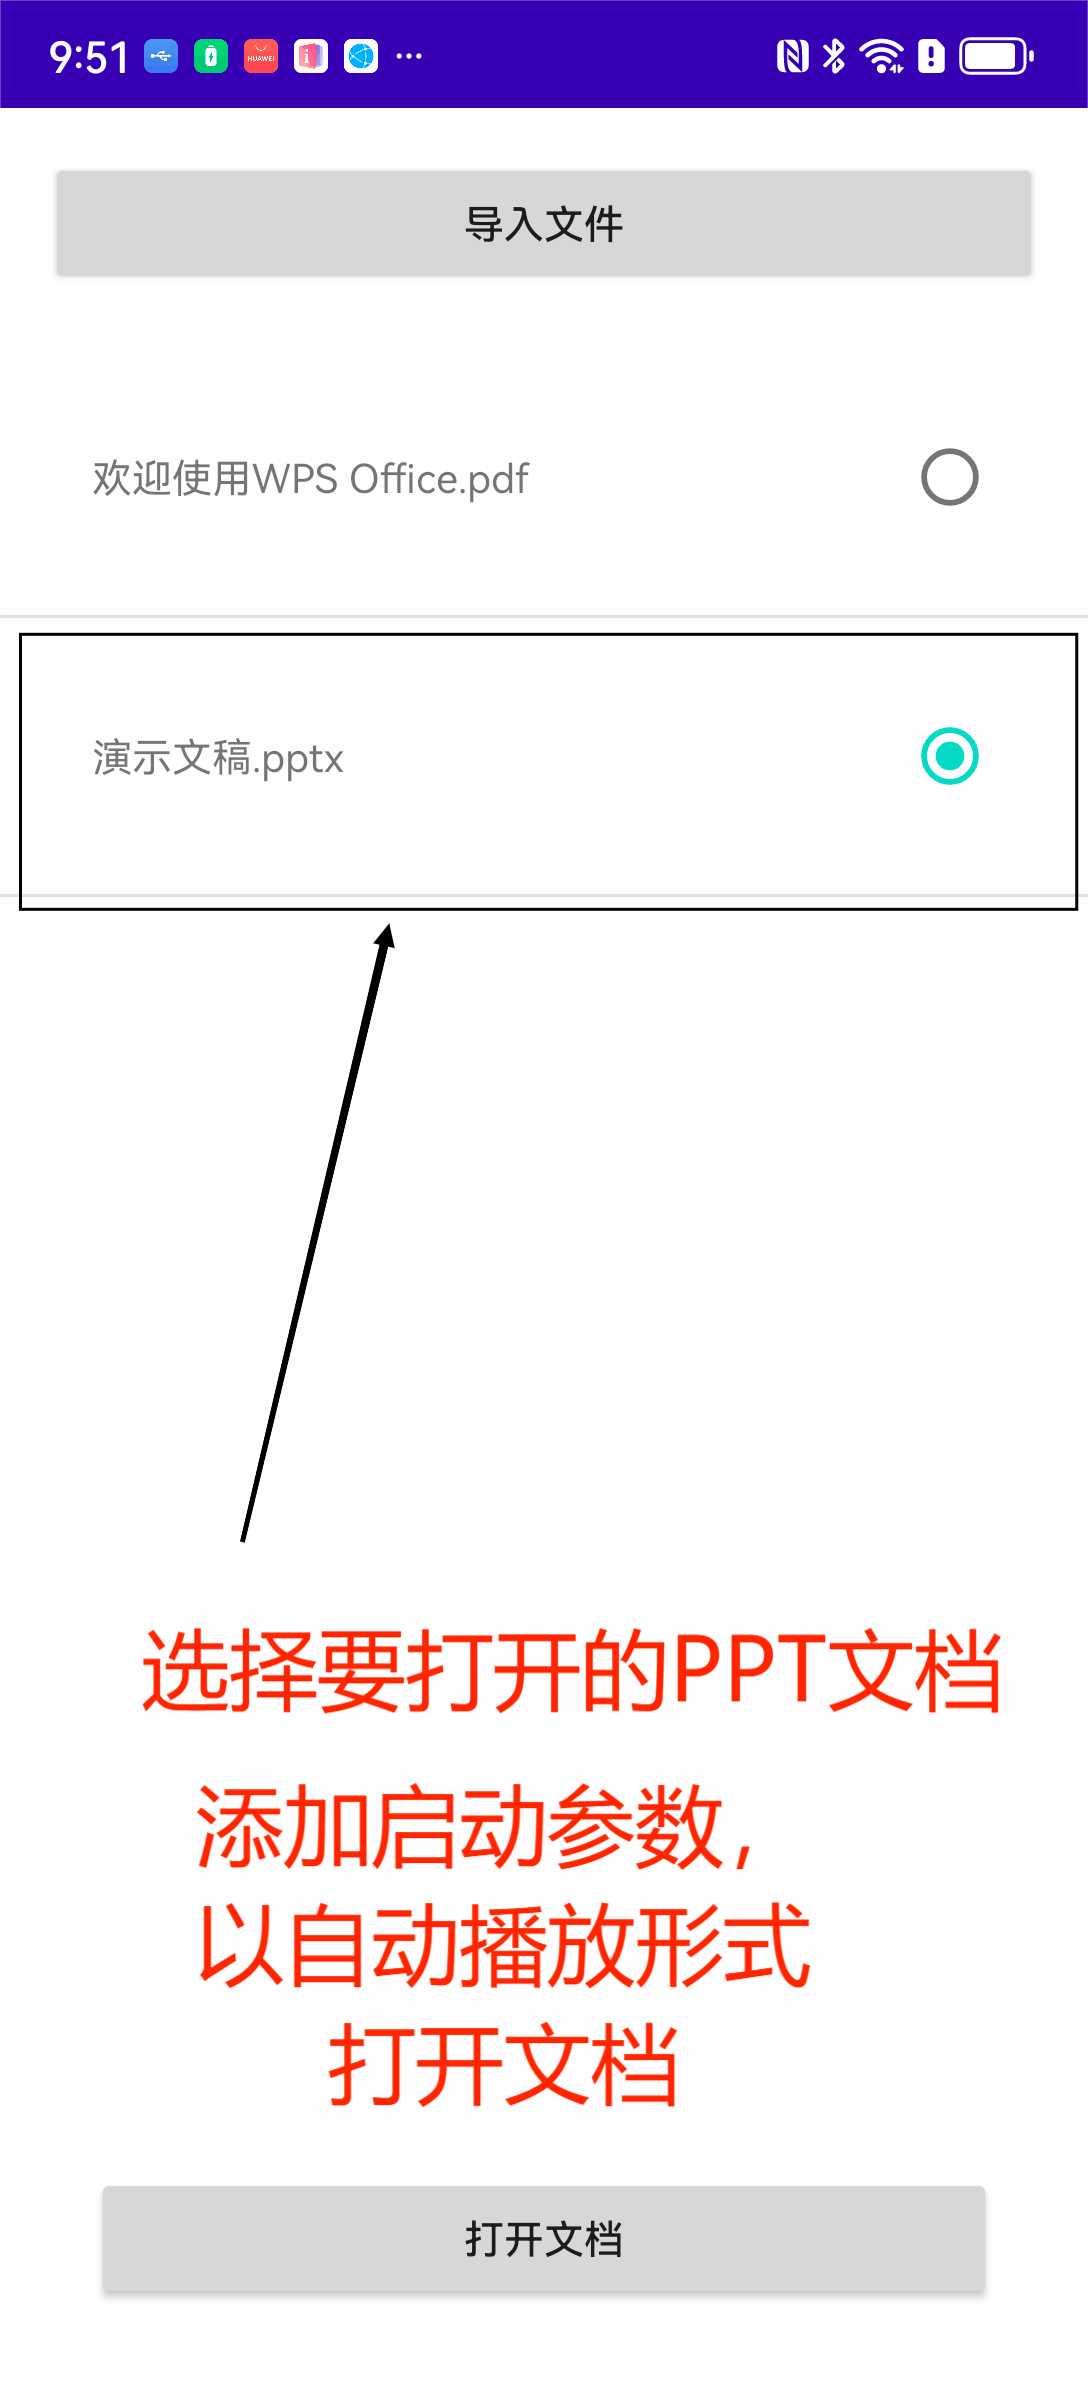 WPS二次<span style='color:red;'>开发</span>系列：<span style='color:red;'>以</span>自动播放模式<span style='color:red;'>打开</span>PPT<span style='color:red;'>文档</span>